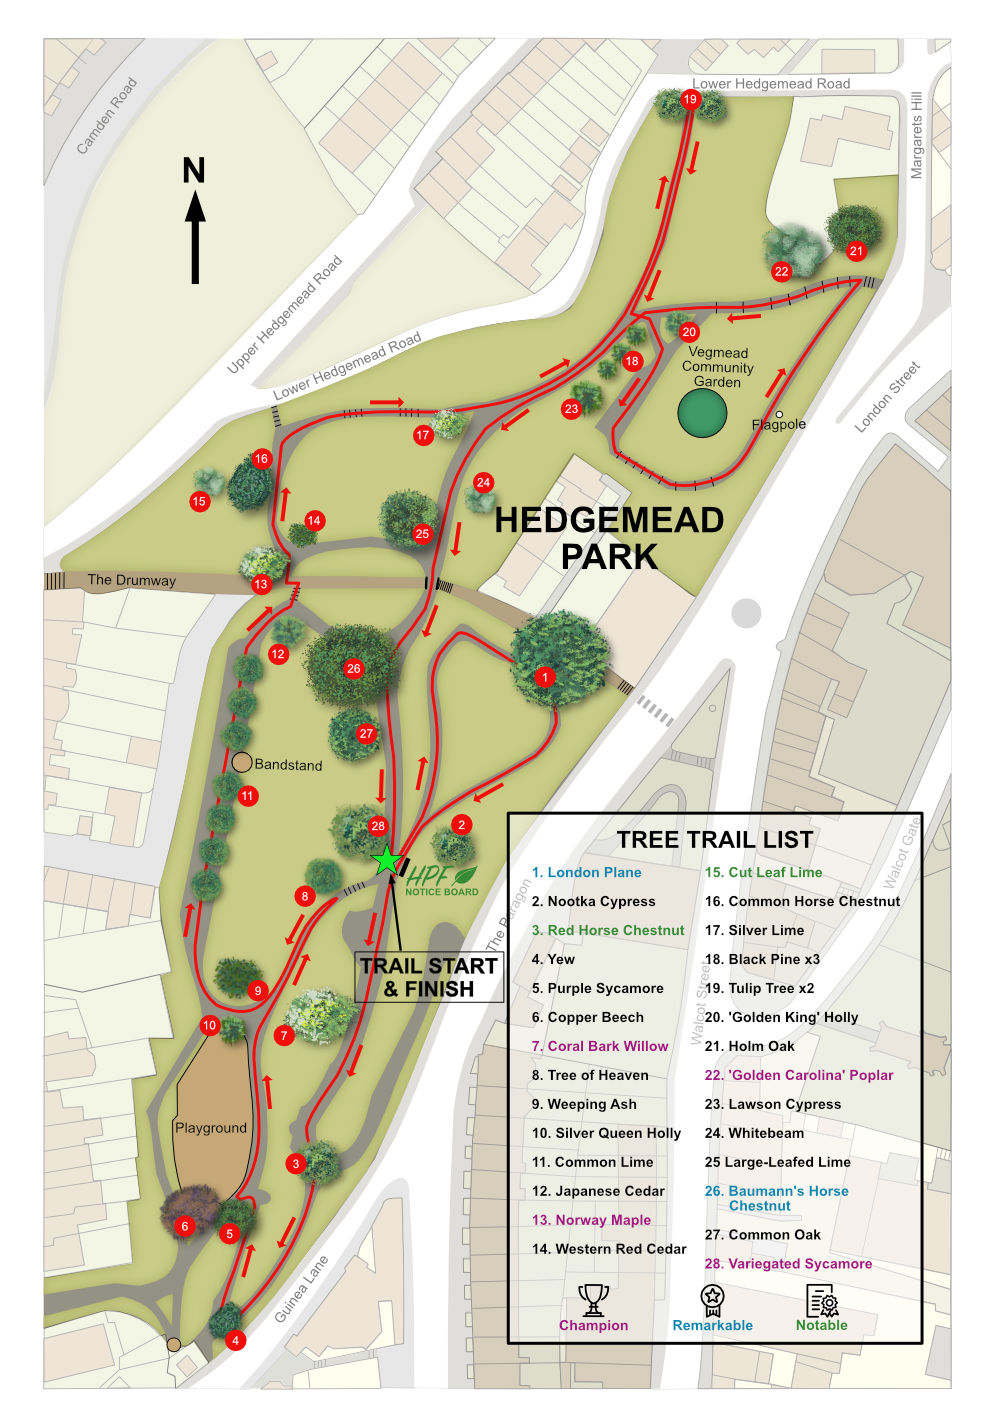 A map showing the route and trees on the Friends of Hedgemead Park tree trail